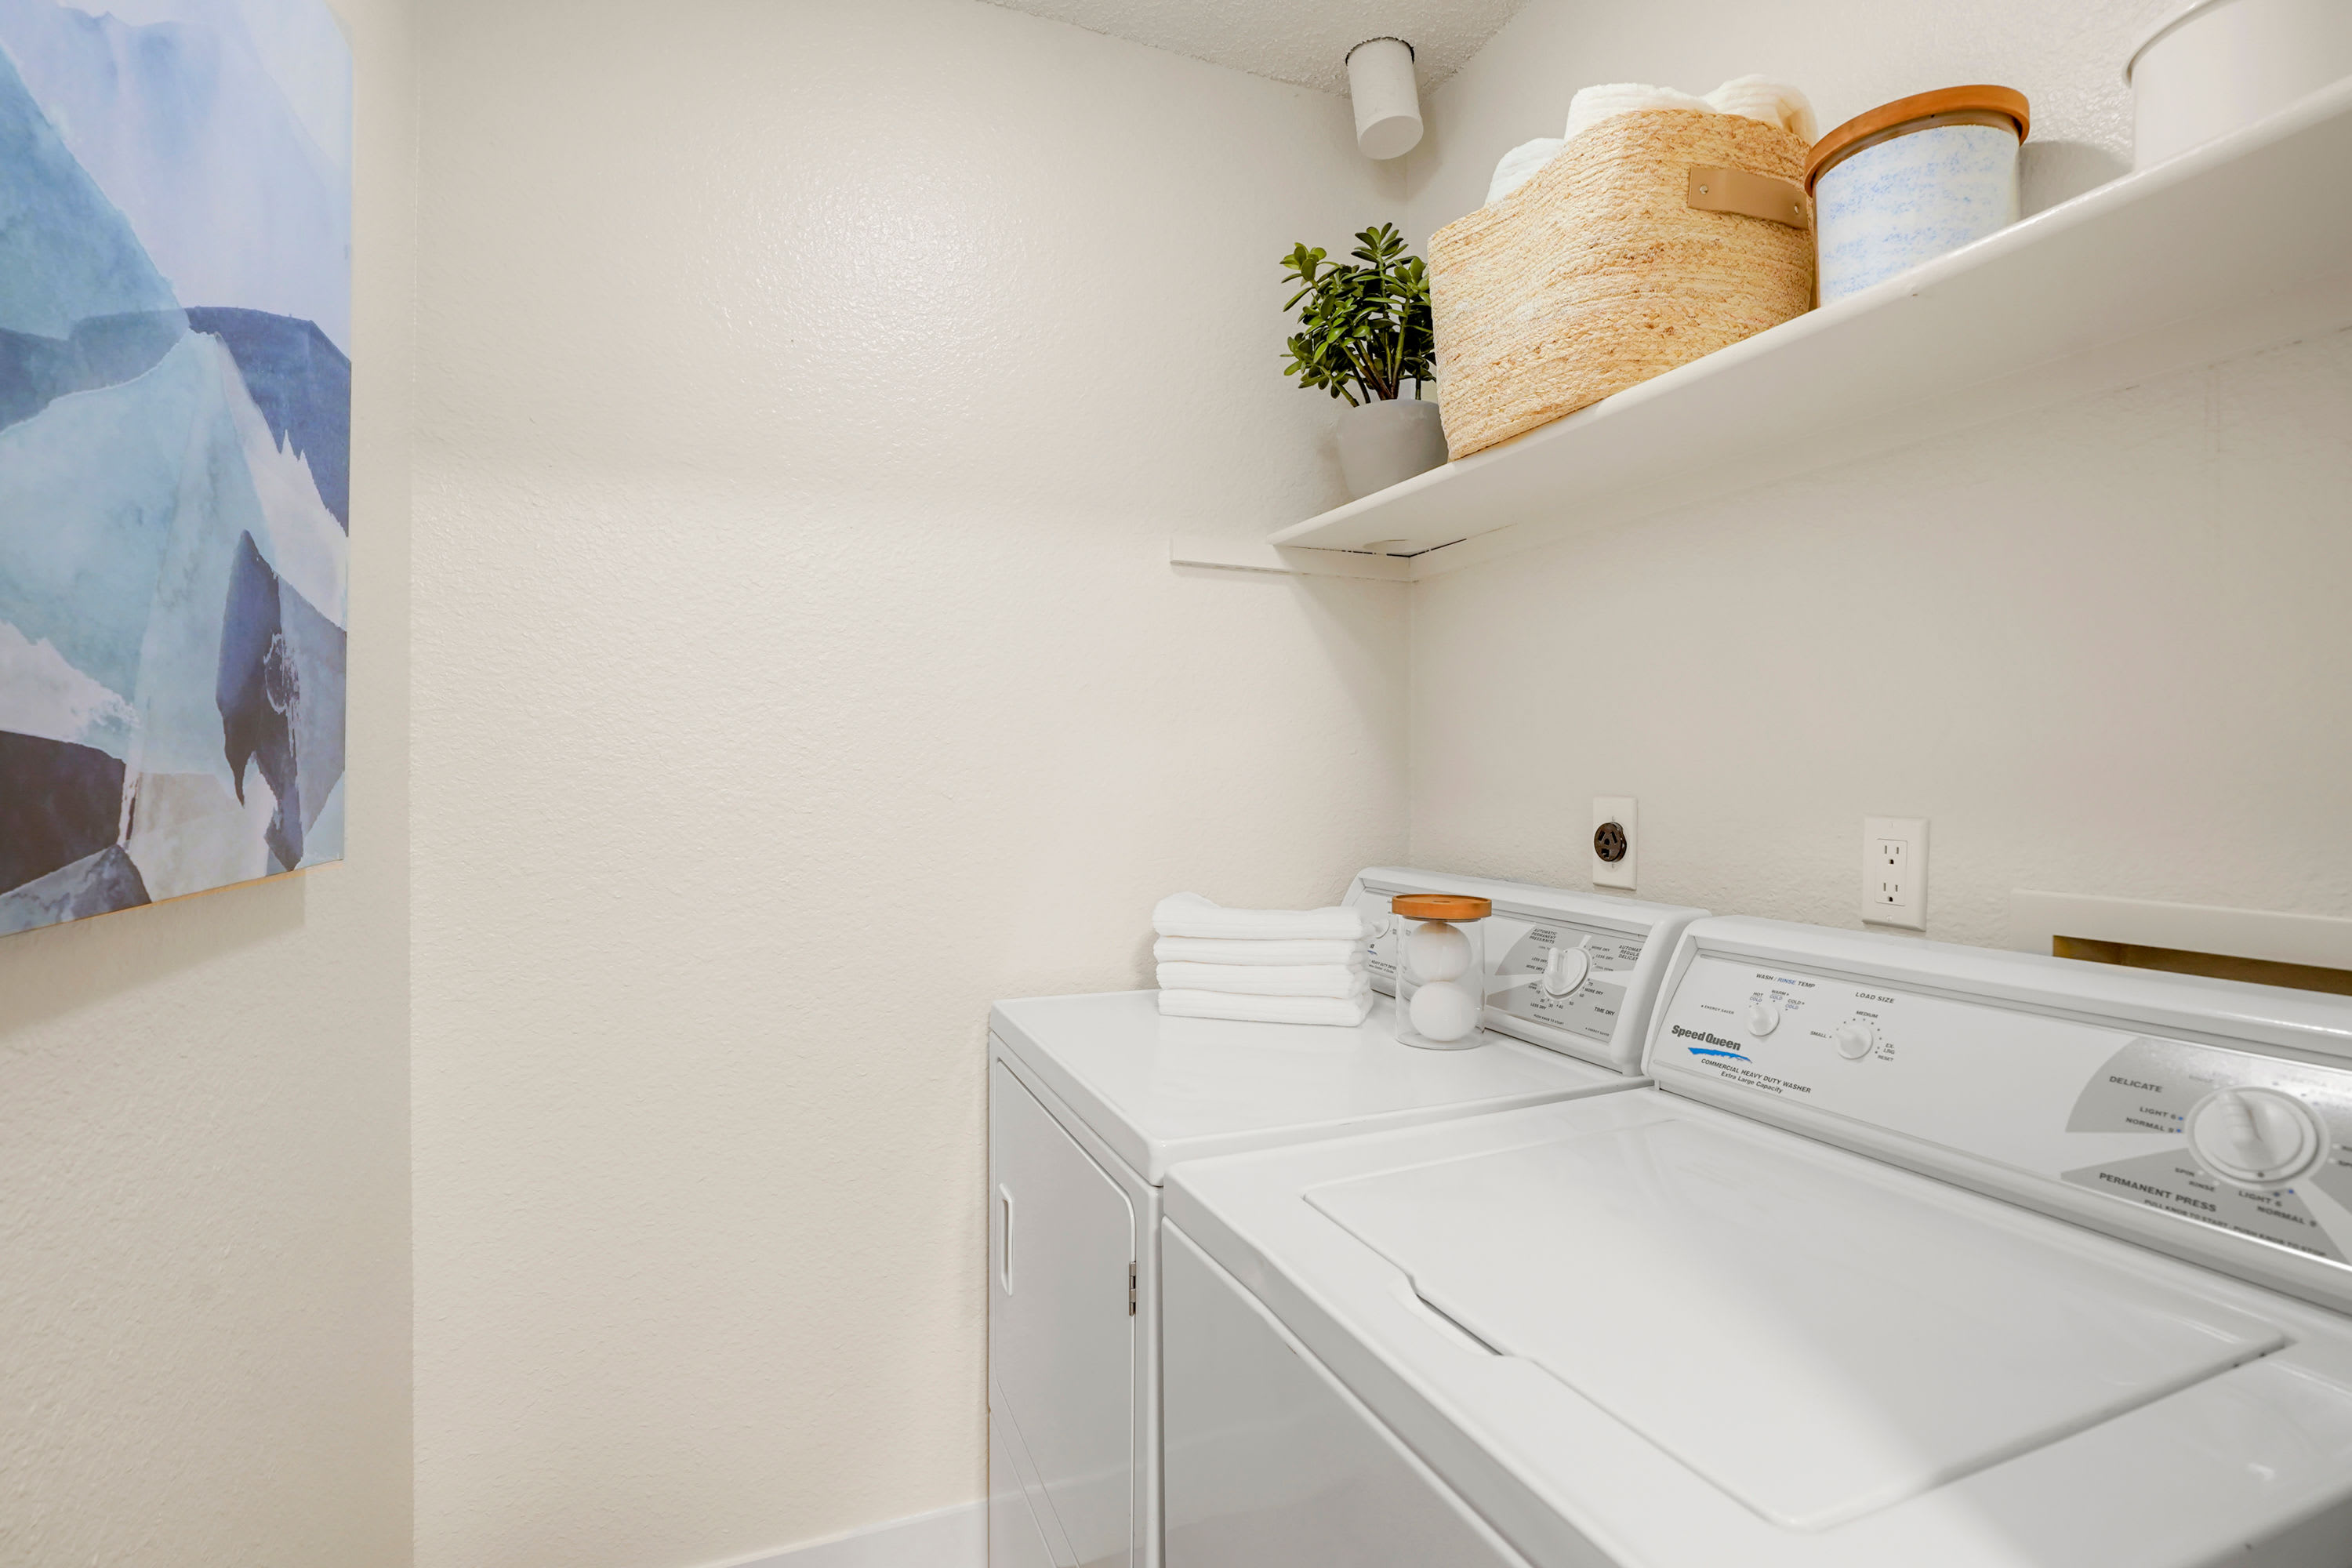 Washer and dryer in your home for easy laundry at Sofi Belmar in Lakewood, Colorado